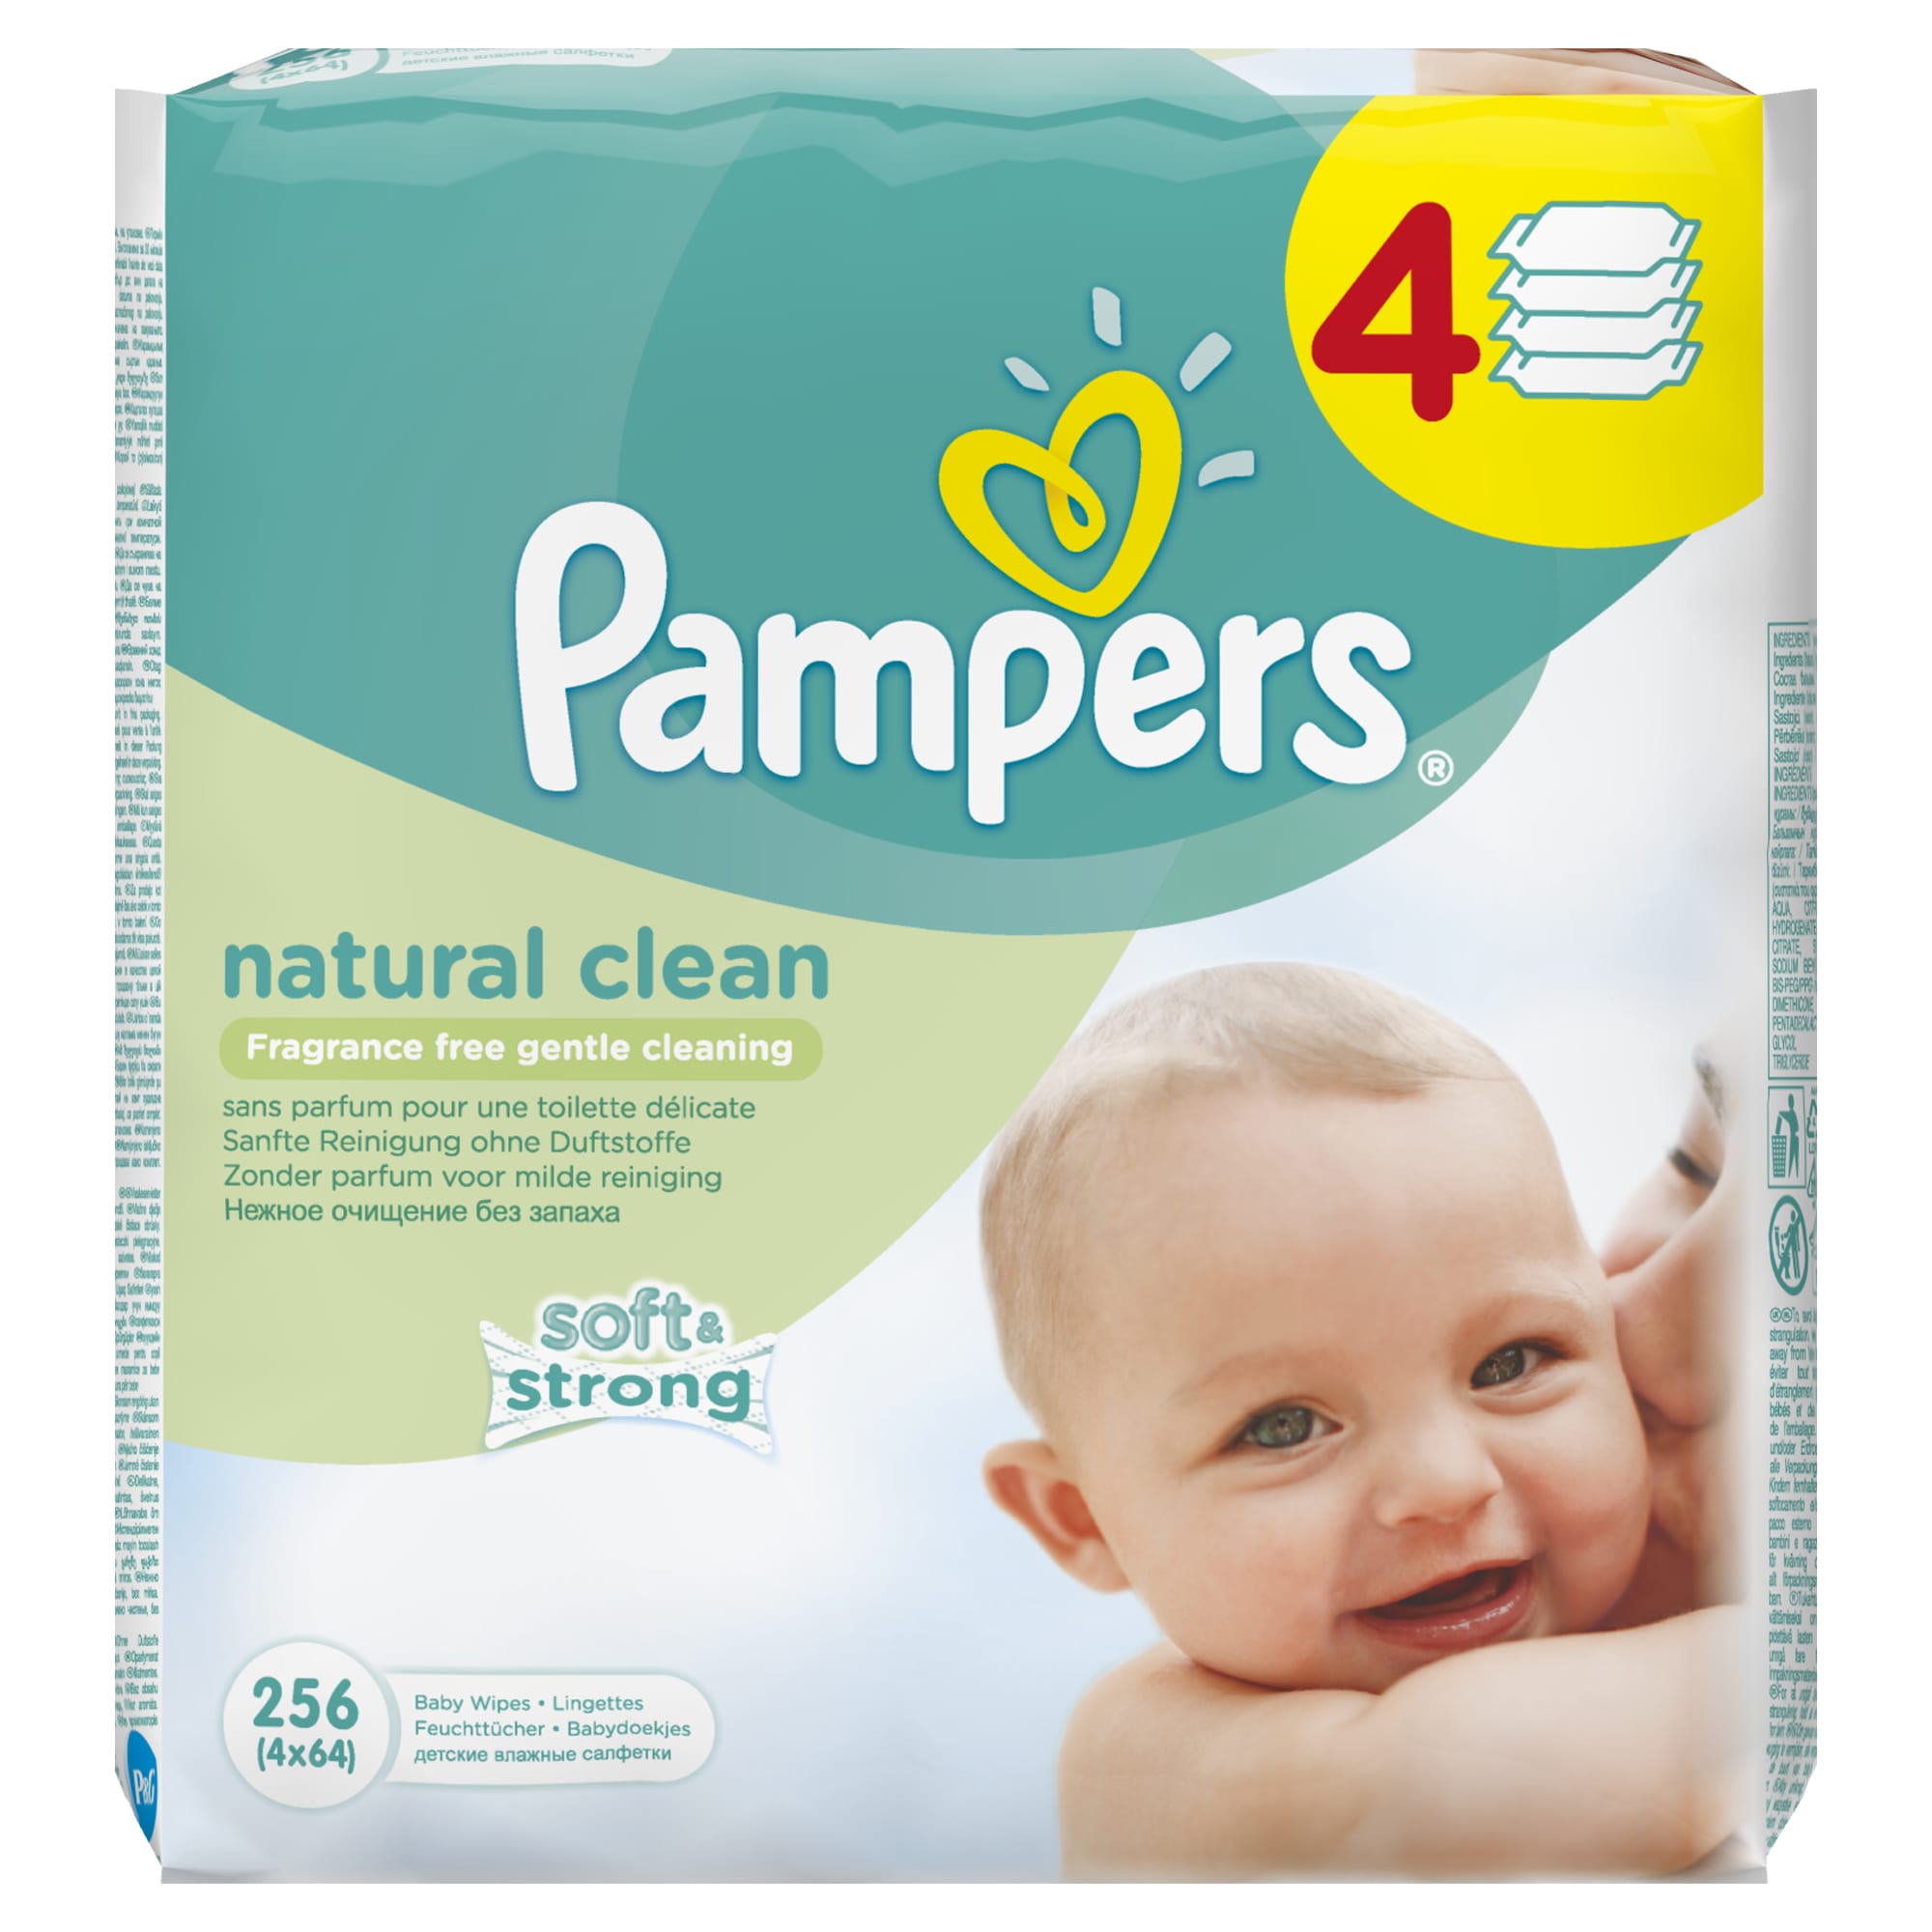 Alternative proposal Fruity barn Servetele umede Pampers Natural Clean Baby 4 pachete 256 buc. - eMAG.ro